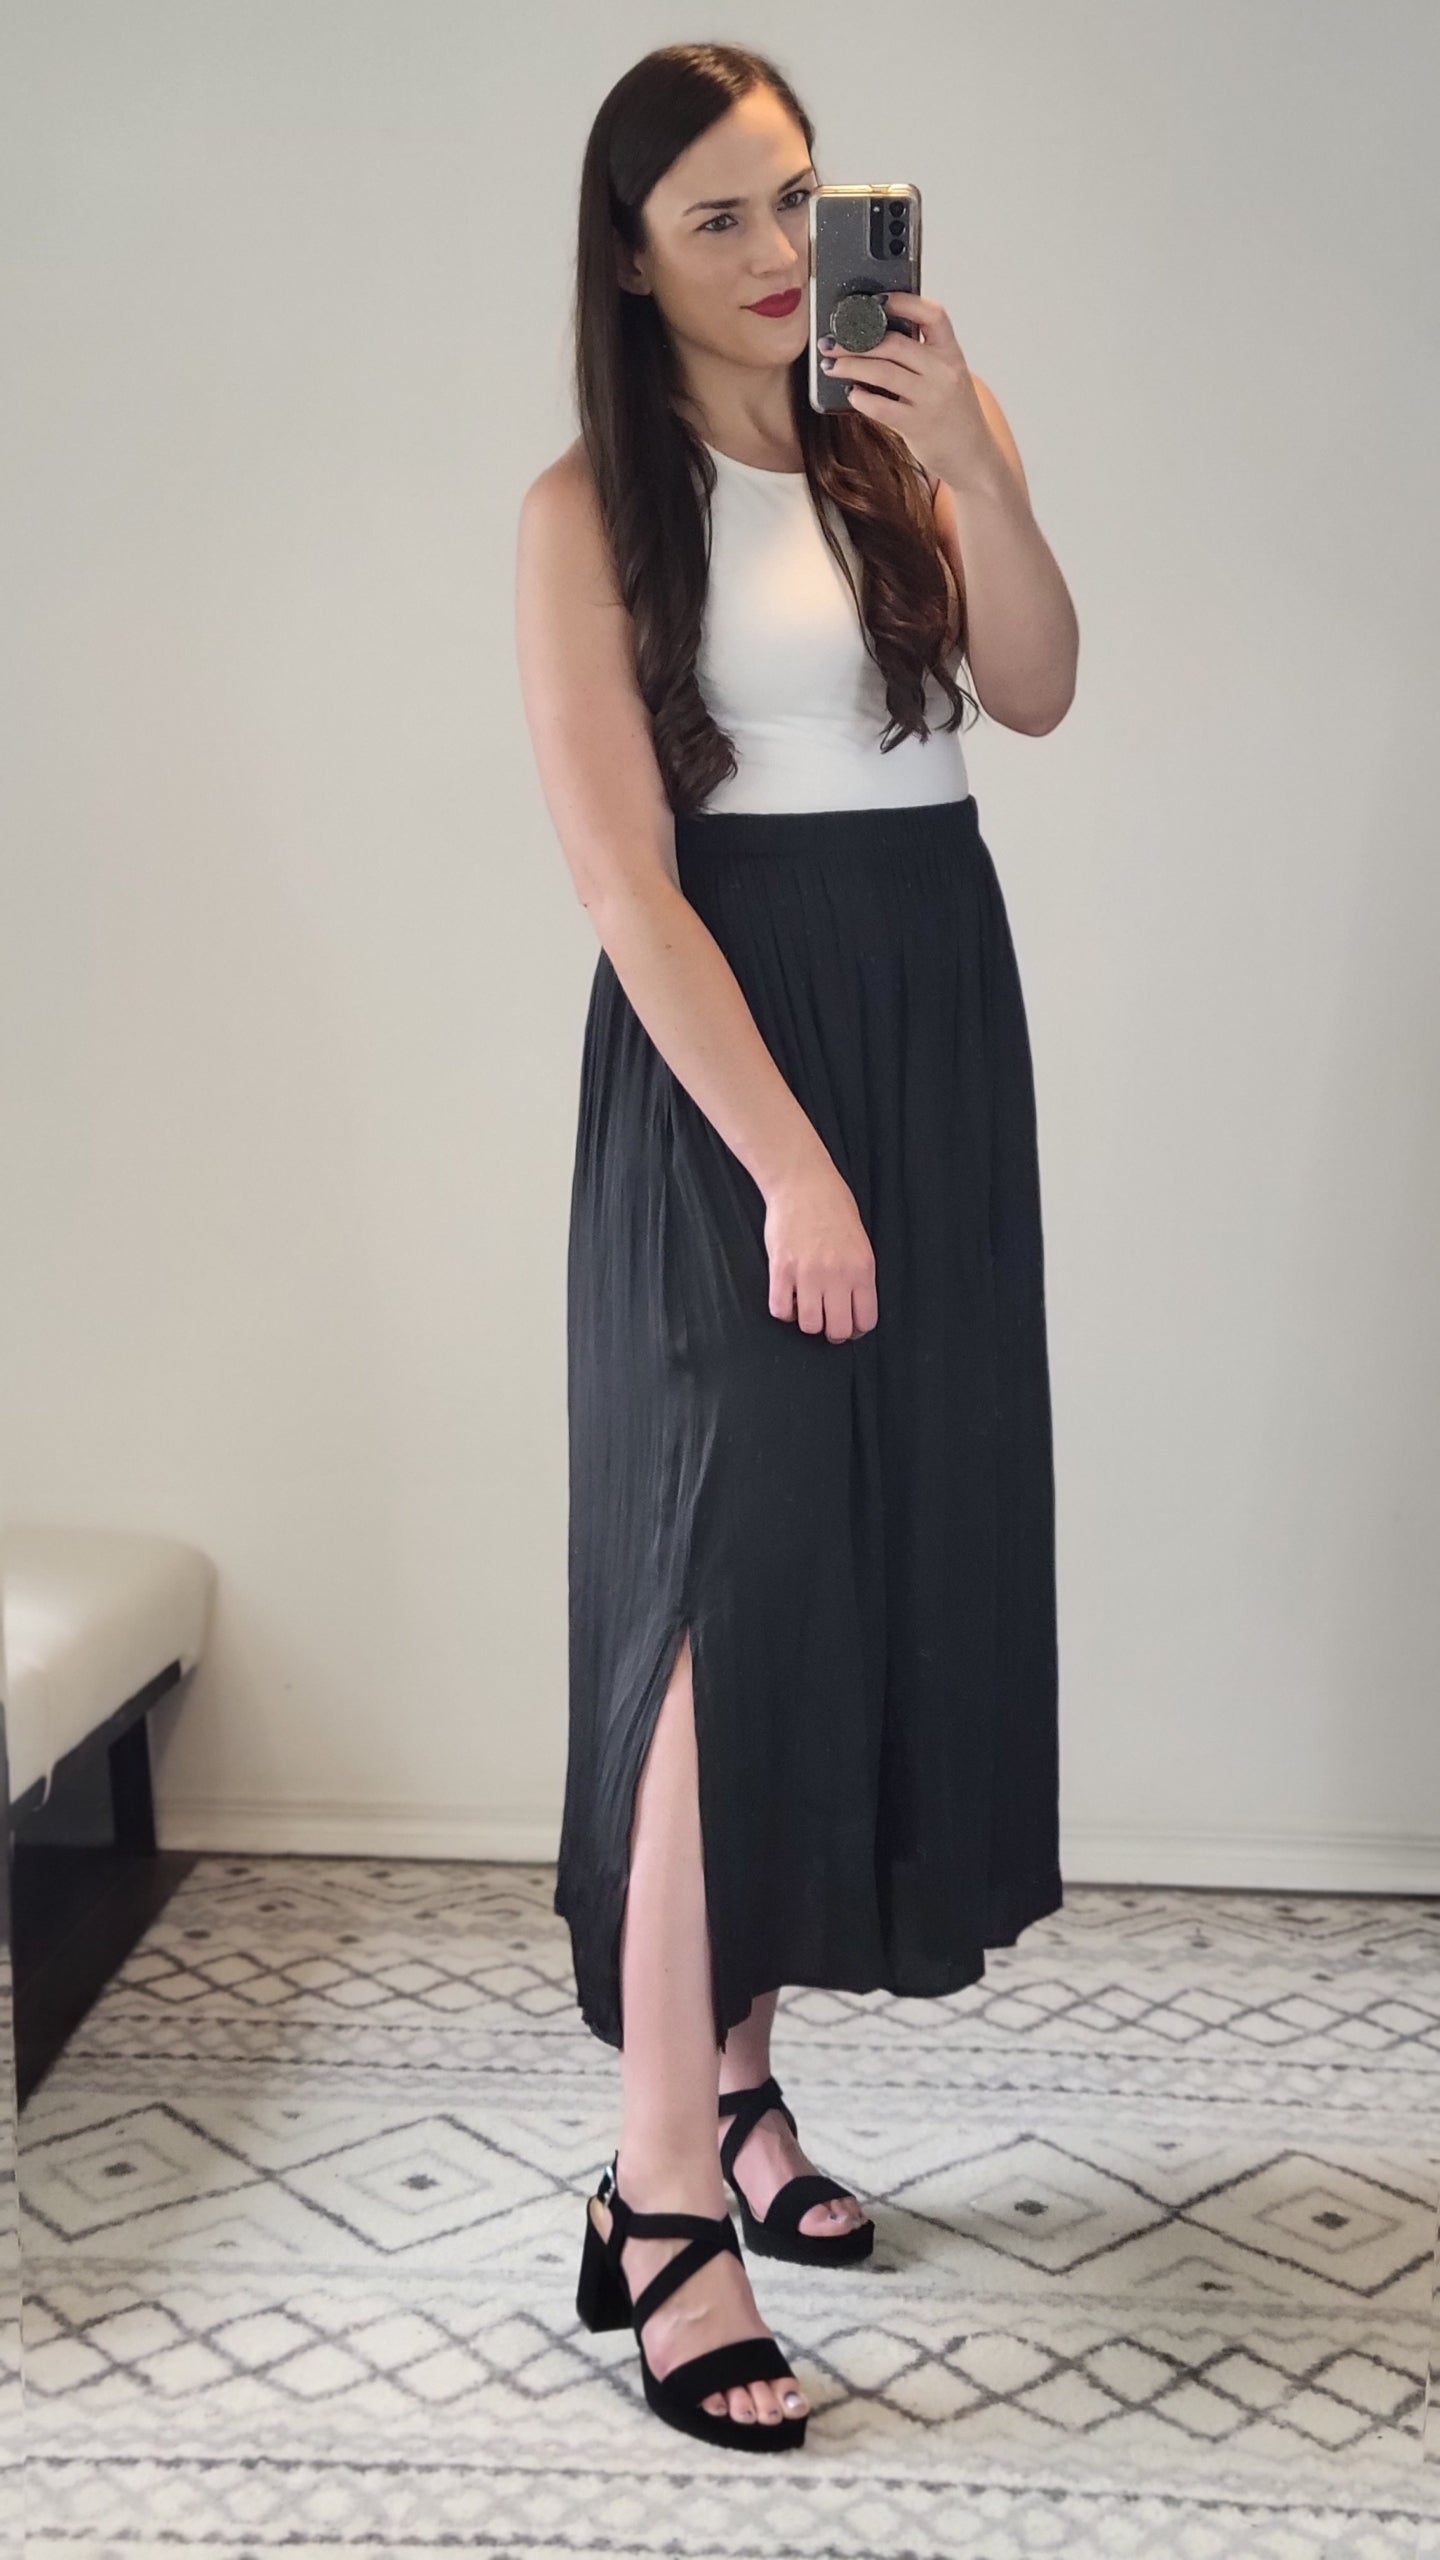 Black A-Line Skirt with Pockets "Carrie"